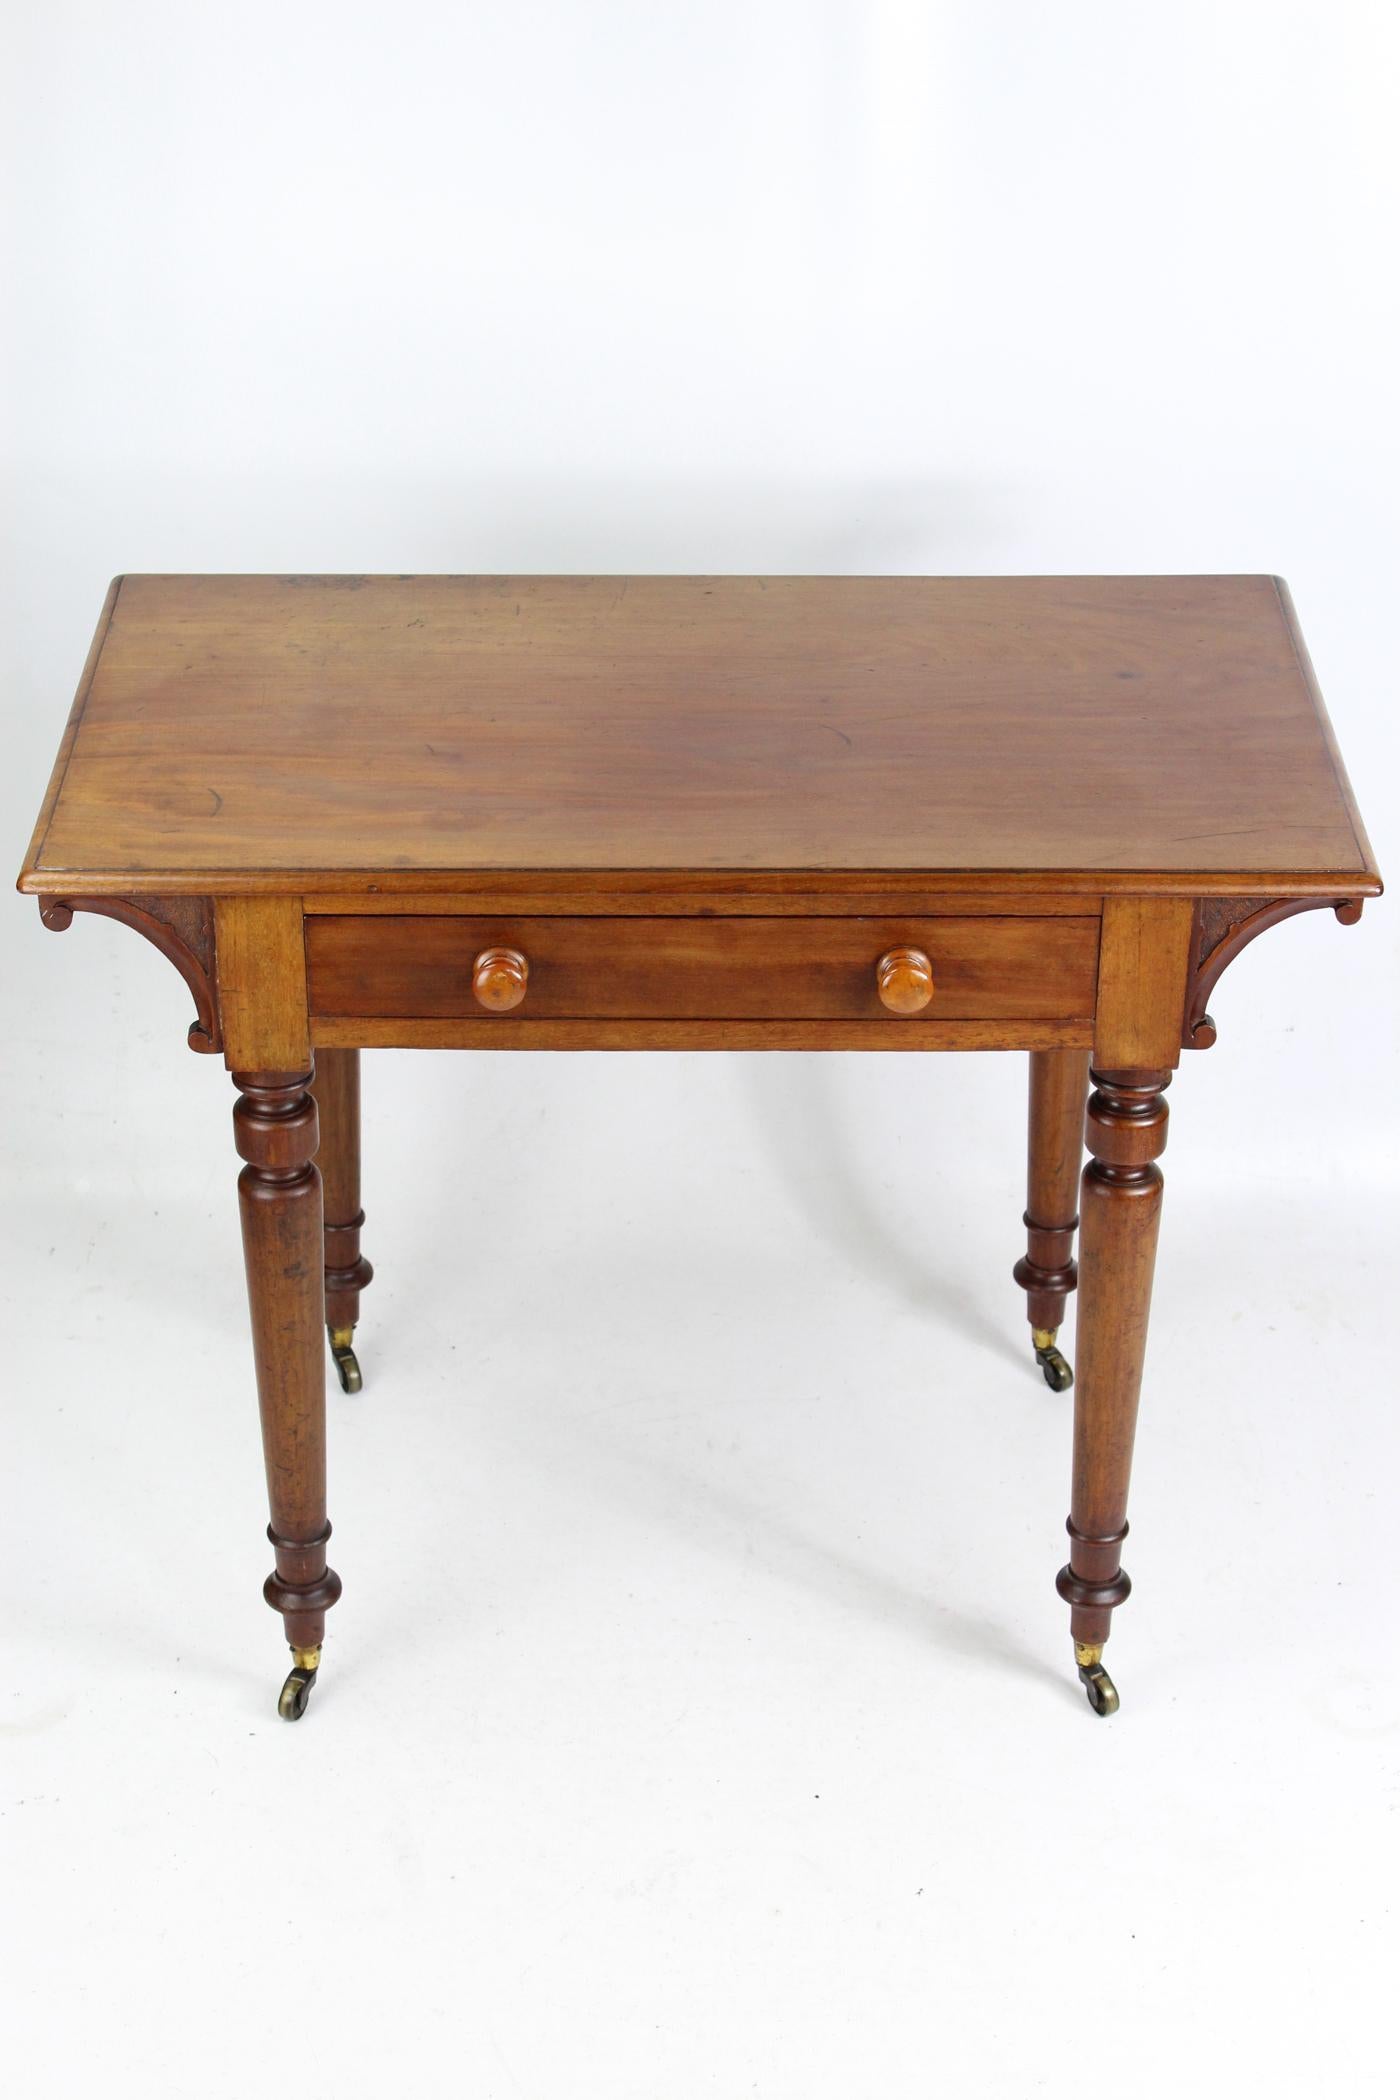 A good quality small antique Victorian mahogany writing table or desk with a single drawer dating from circa 1870. In mellow well-figured mahogany it stands on elegant turned legs with brass cup casters. With an over sailing top supported by carved